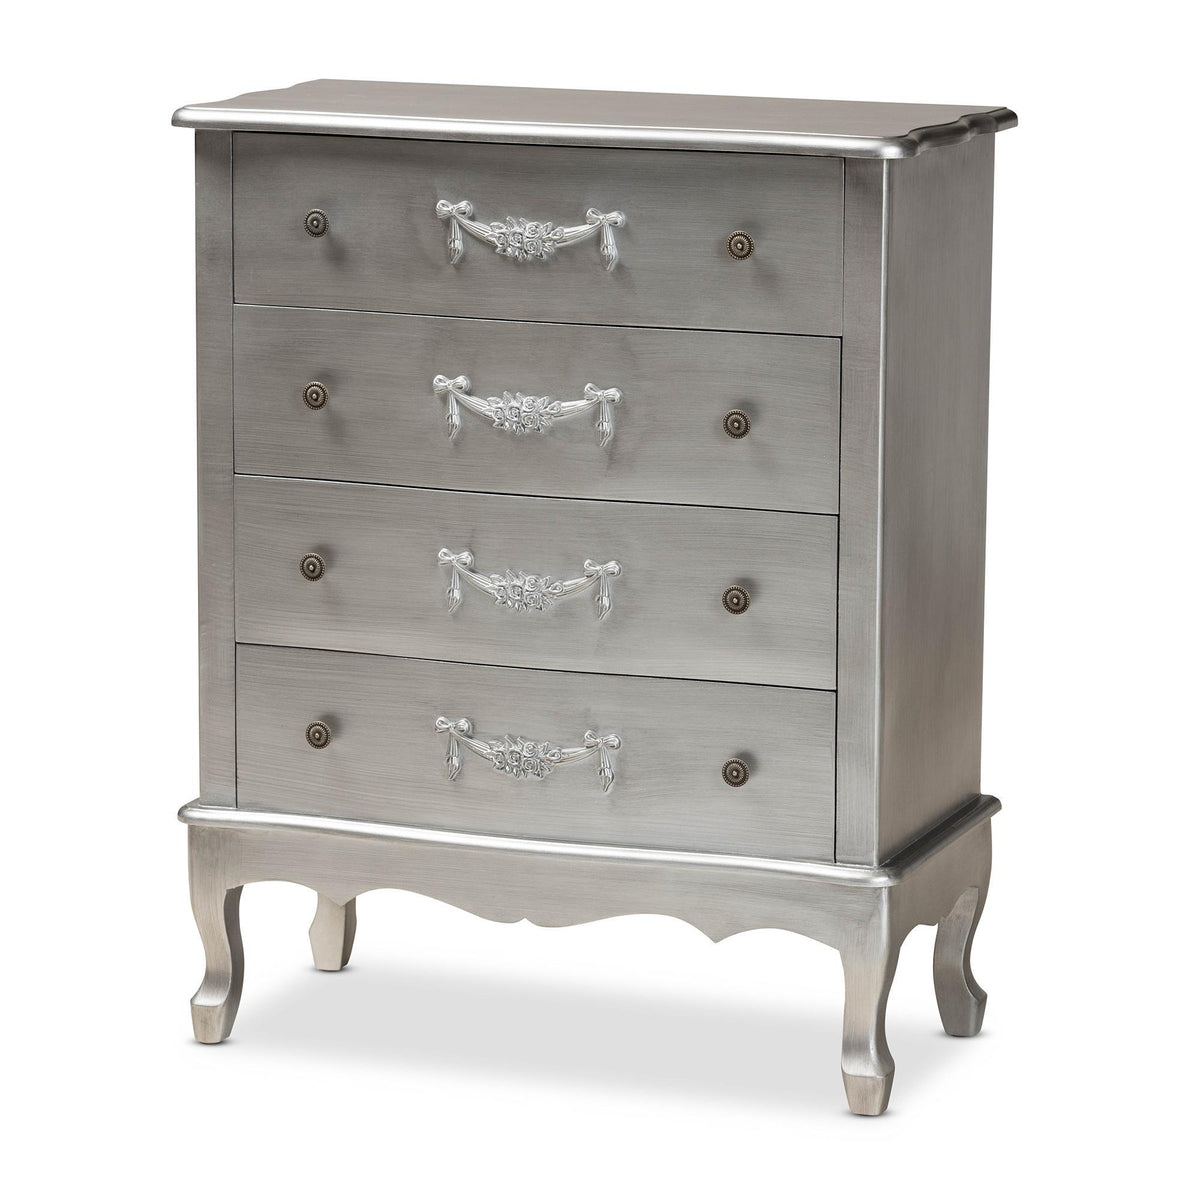 Baxton Studio Callen Classic And Traditional Silver Finished Wood 4-Drawer Storage Cabinet  - JY18B026-Silver-4DW-Cabinet